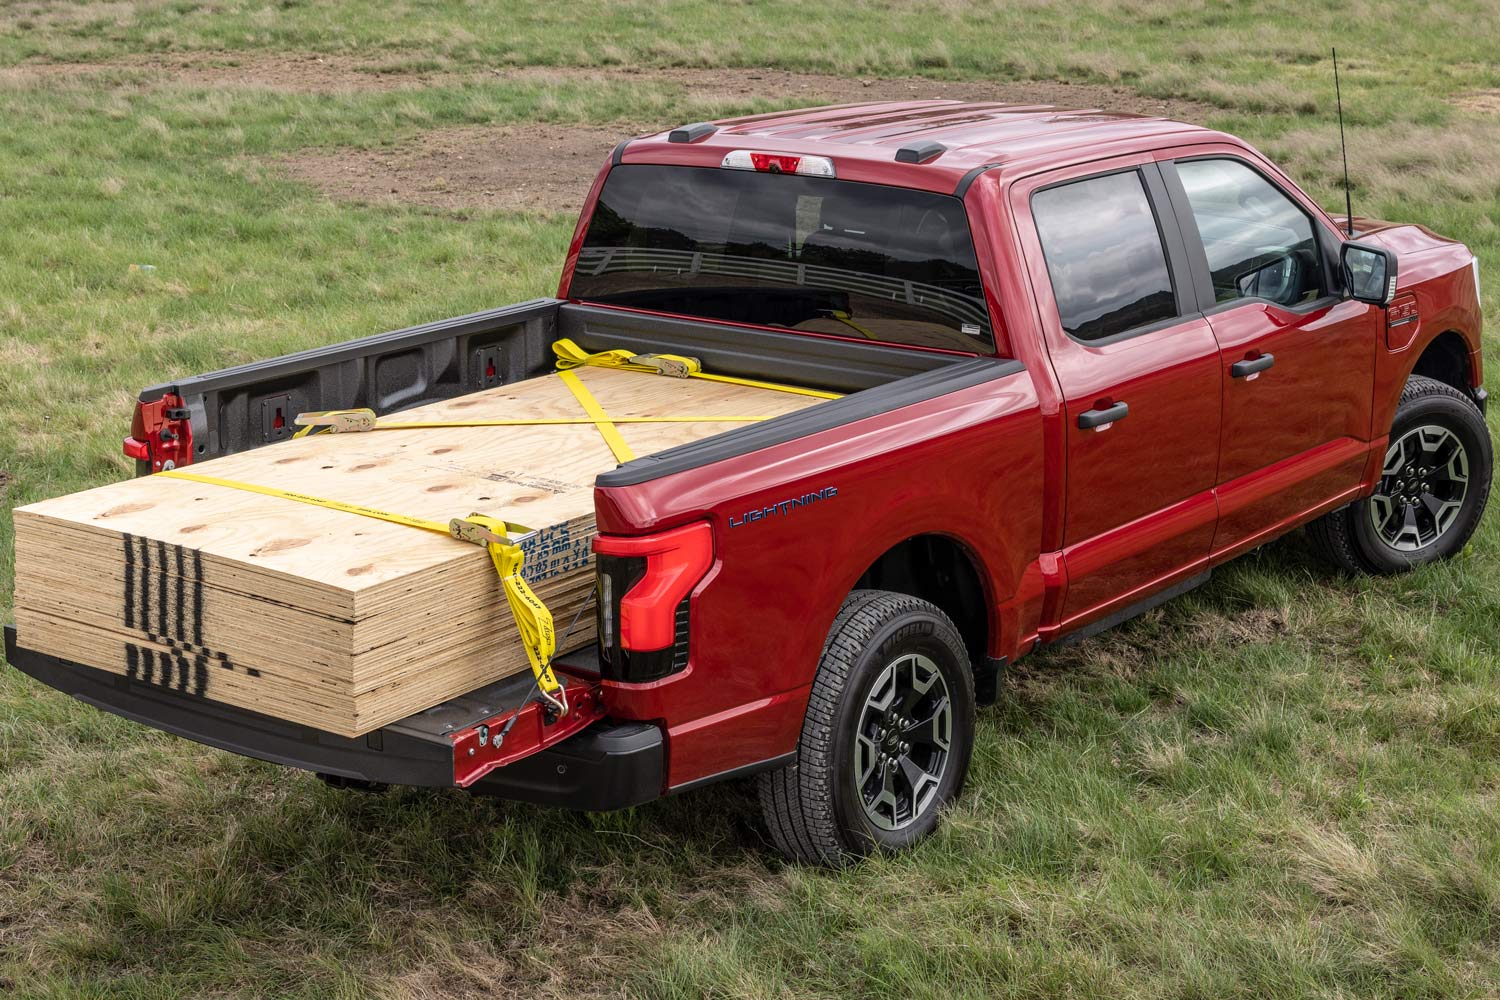 Ford F-150 Lightning hauling a payload of plywood strapped in bed